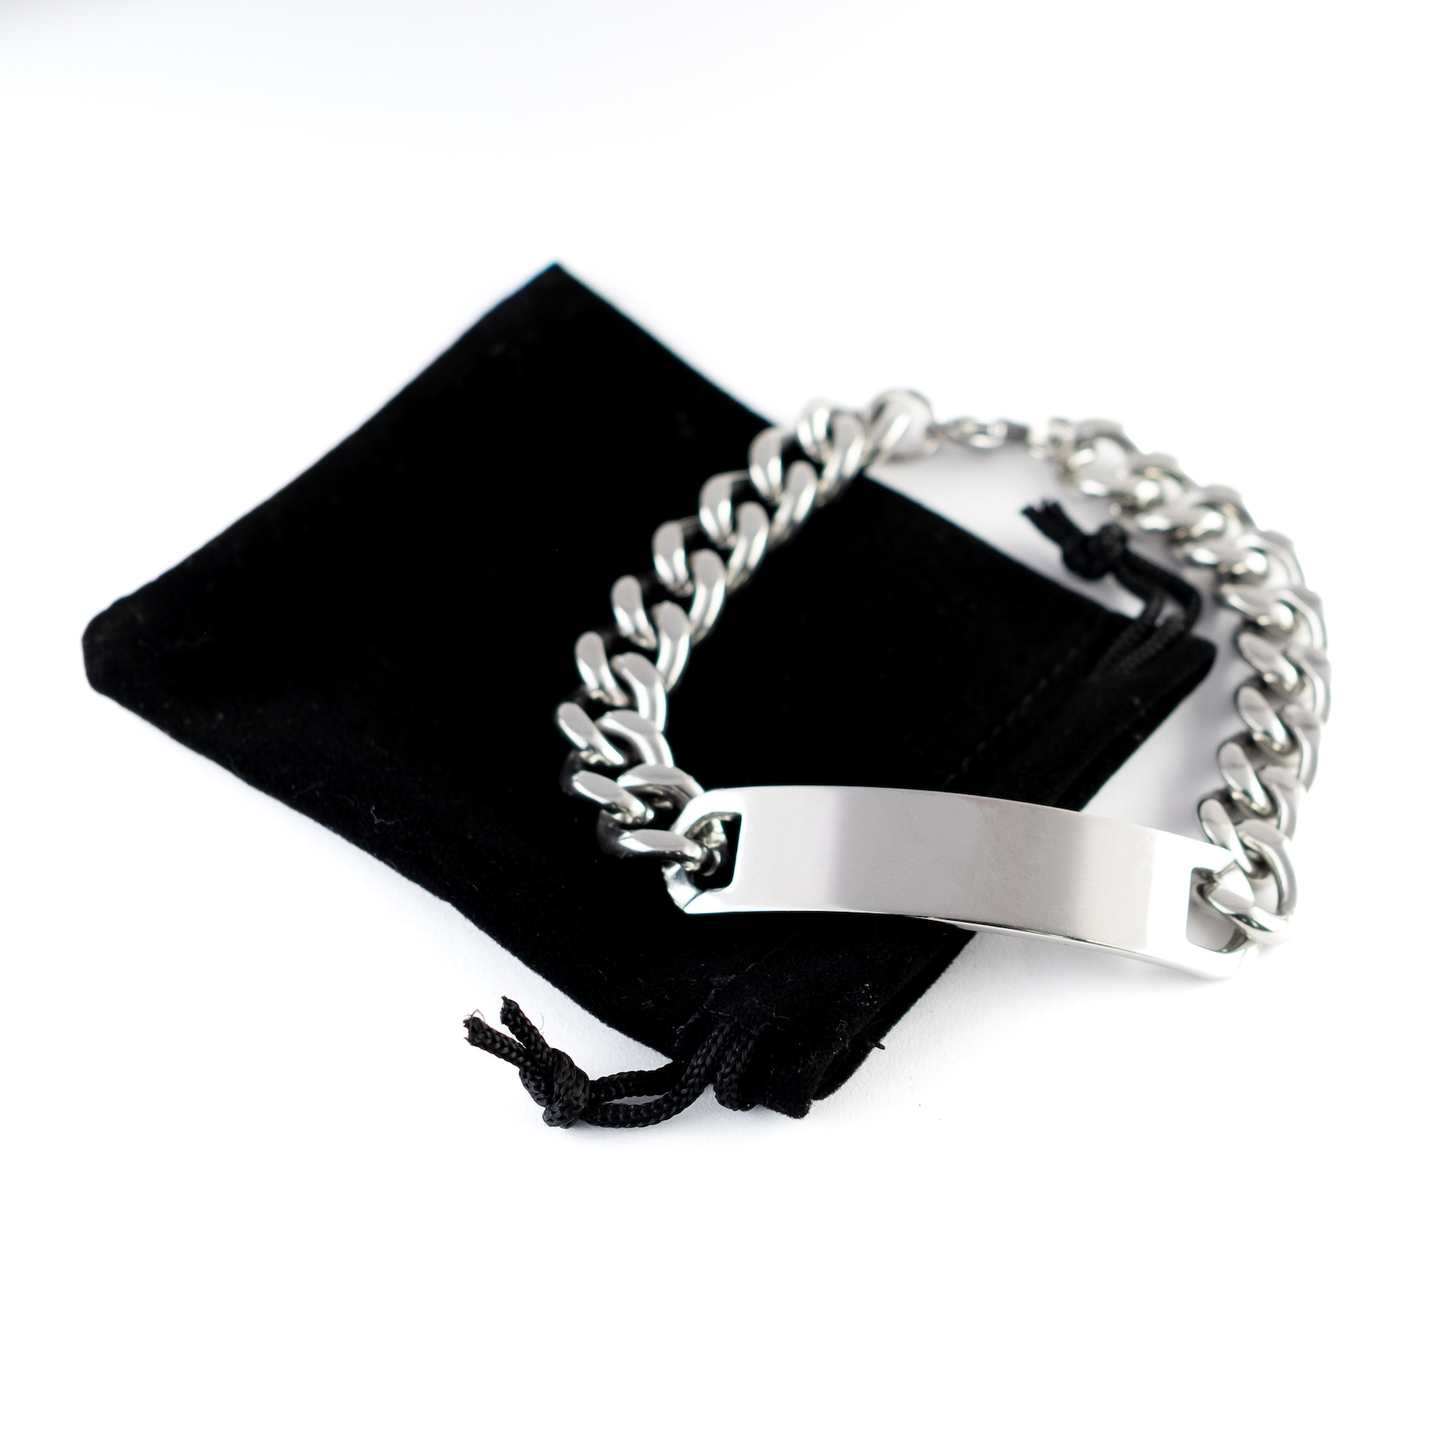 To My Other Mom Thank You Gifts, You are appreciated more than you know, Appreciation Cuban Chain Stainless Steel Bracelet for Other Mom, Birthday Unique Gifts for Other Mom